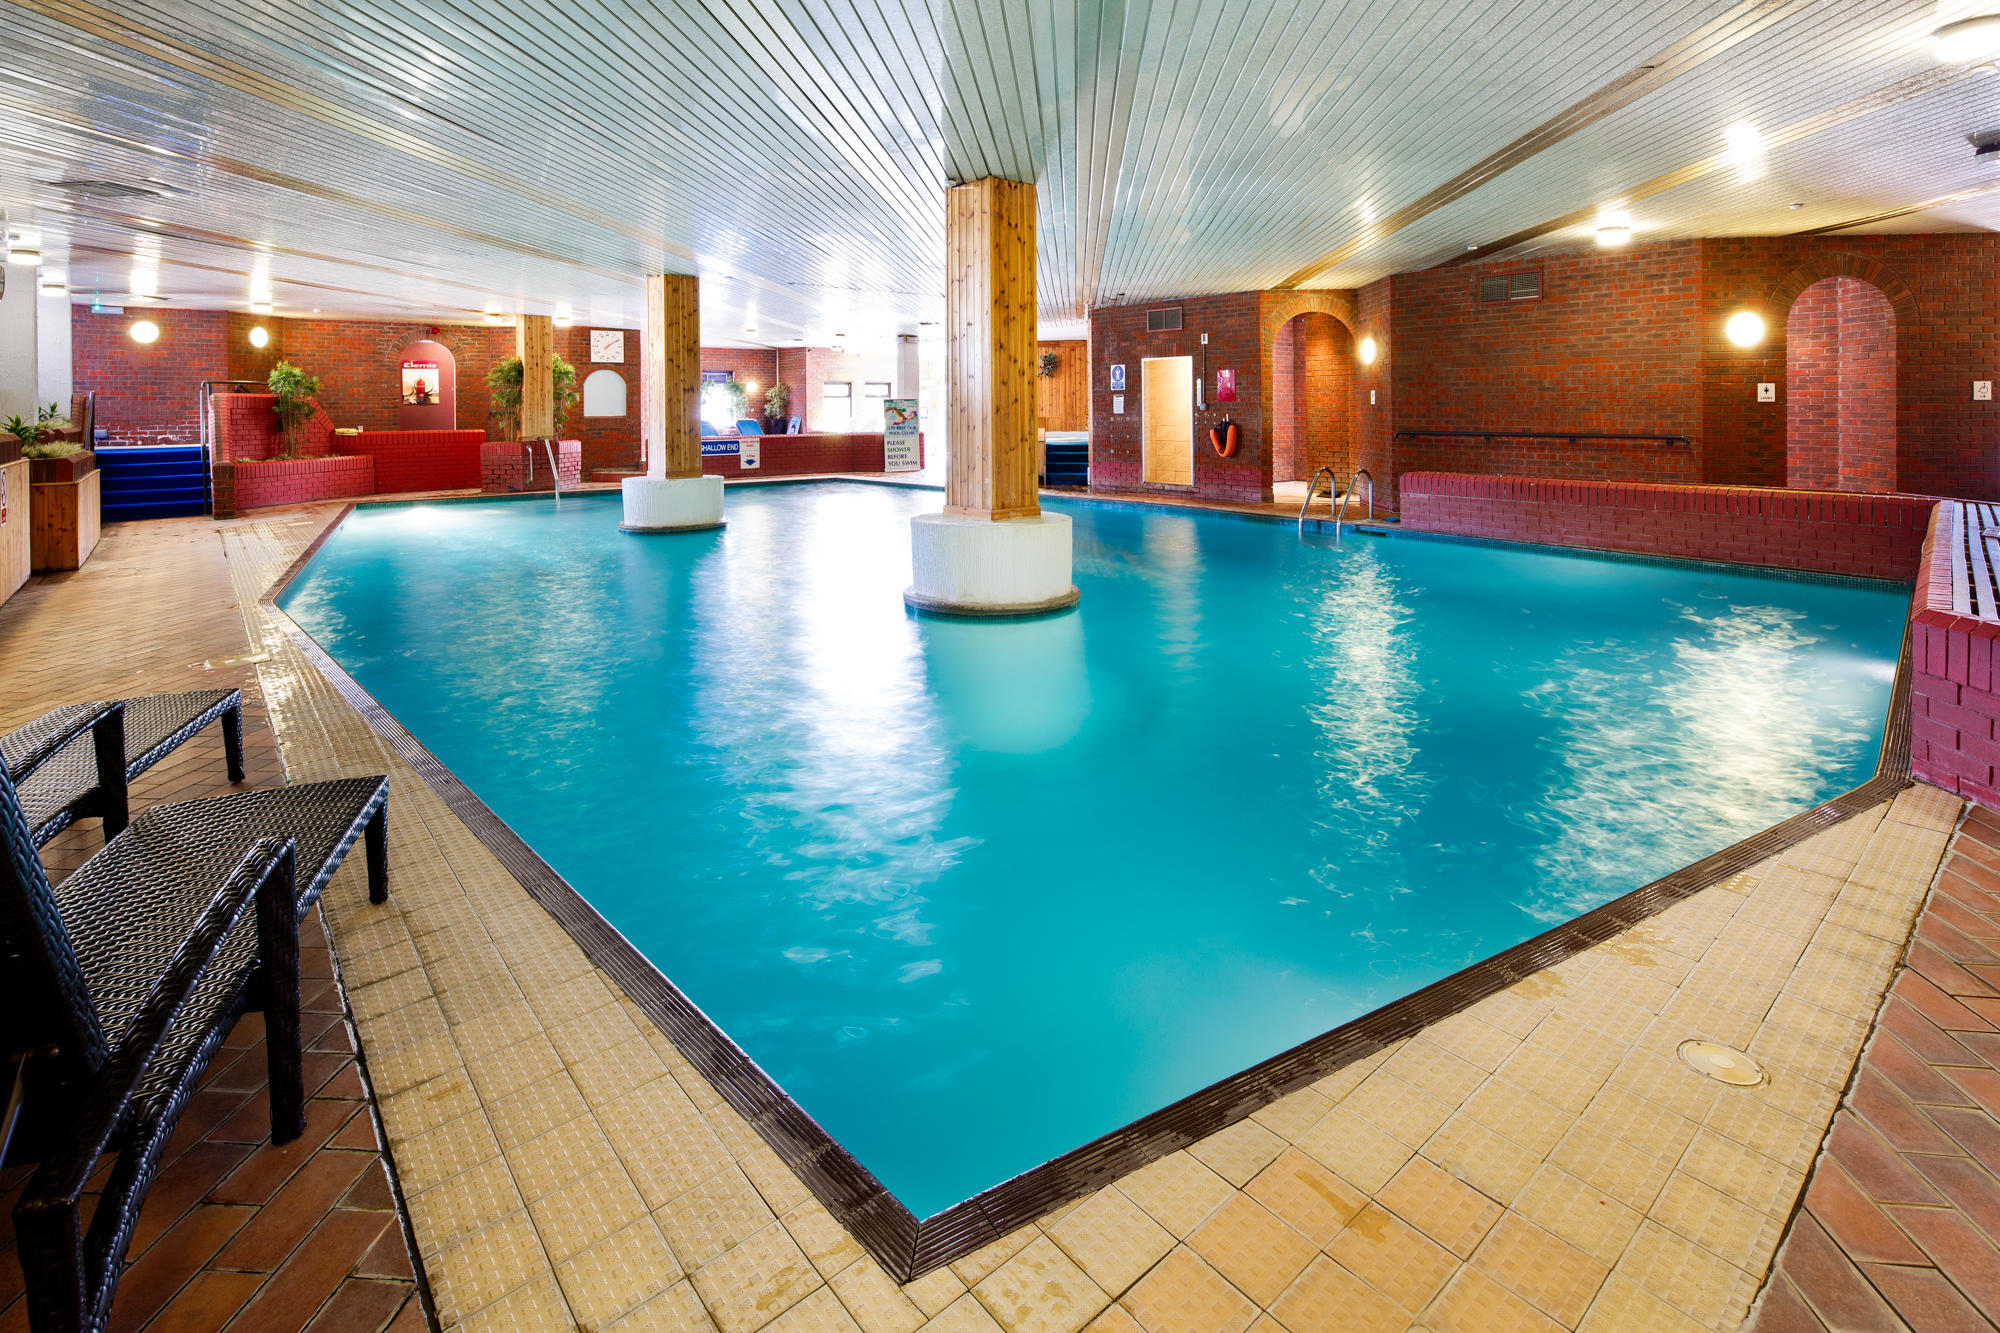 The swimming pool at Mercure Maidstone Great Danes Hotel Mercure Maidstone Great Danes Hotel Maidstone 01622 528565